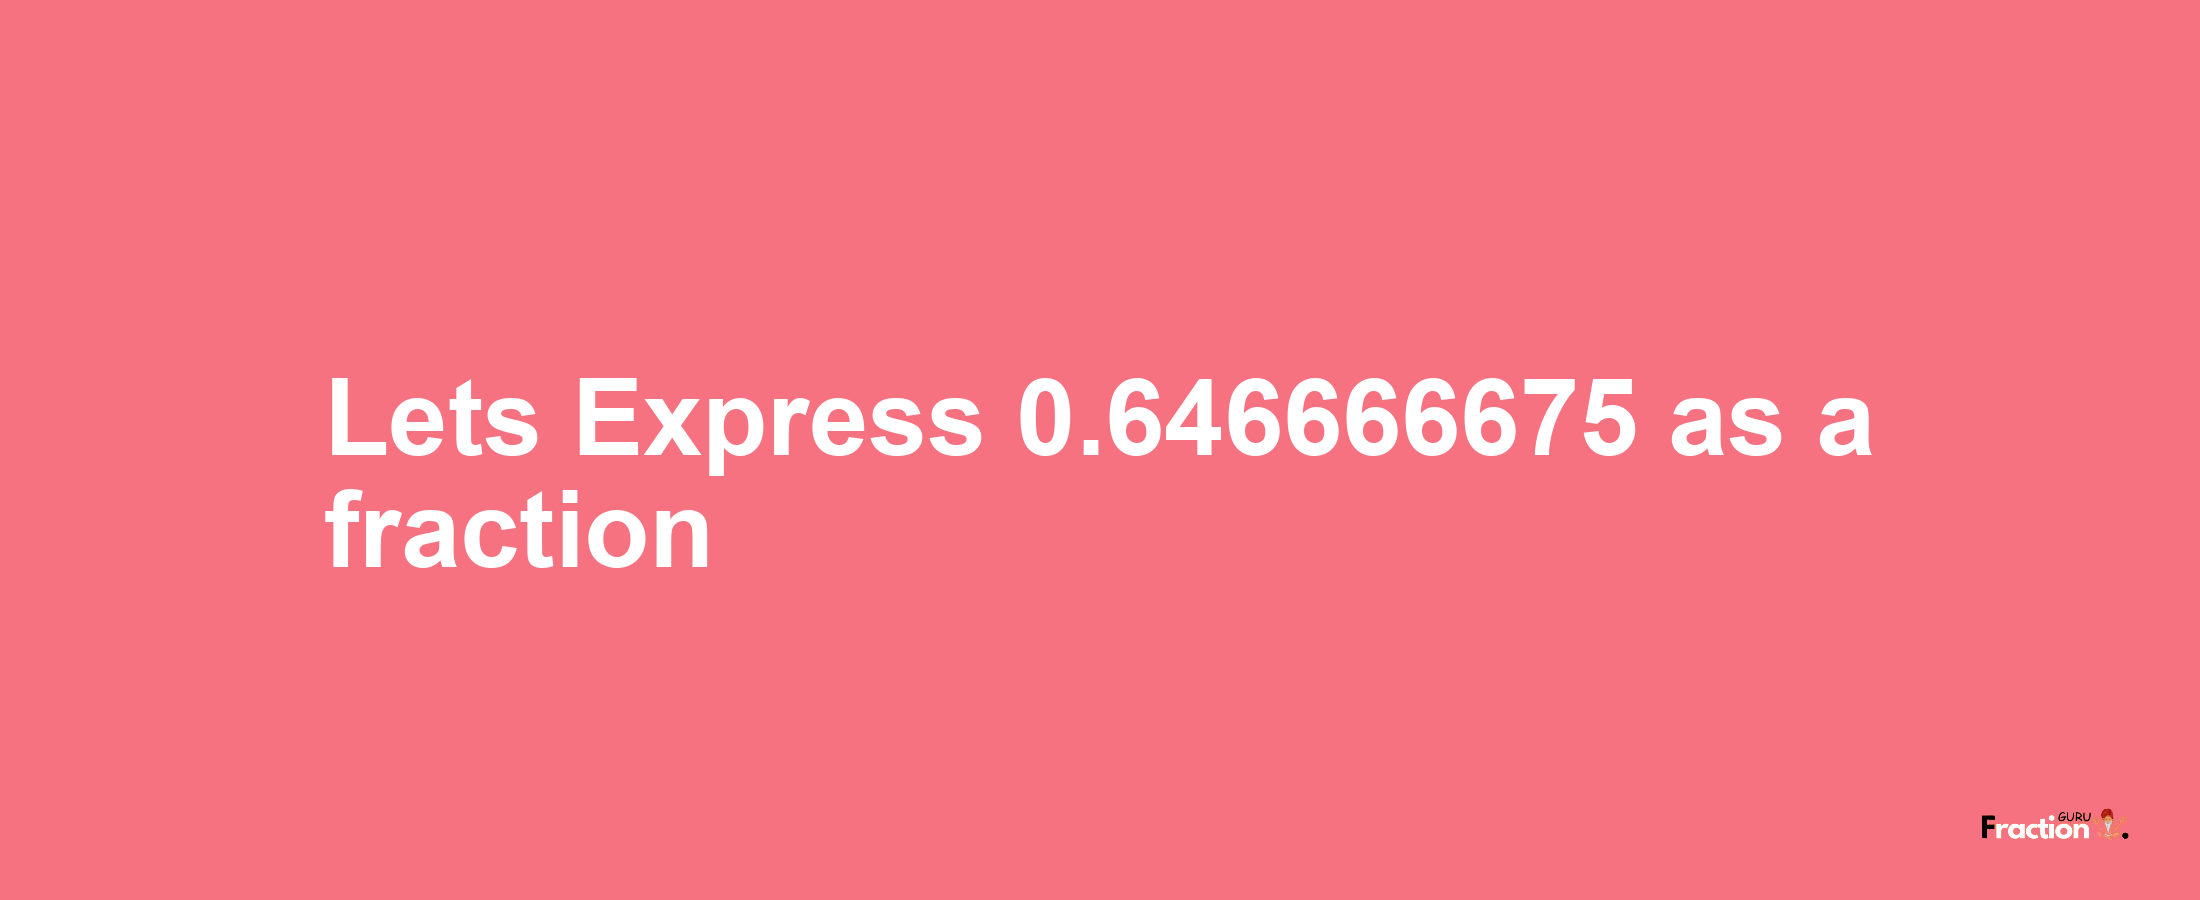 Lets Express 0.646666675 as afraction